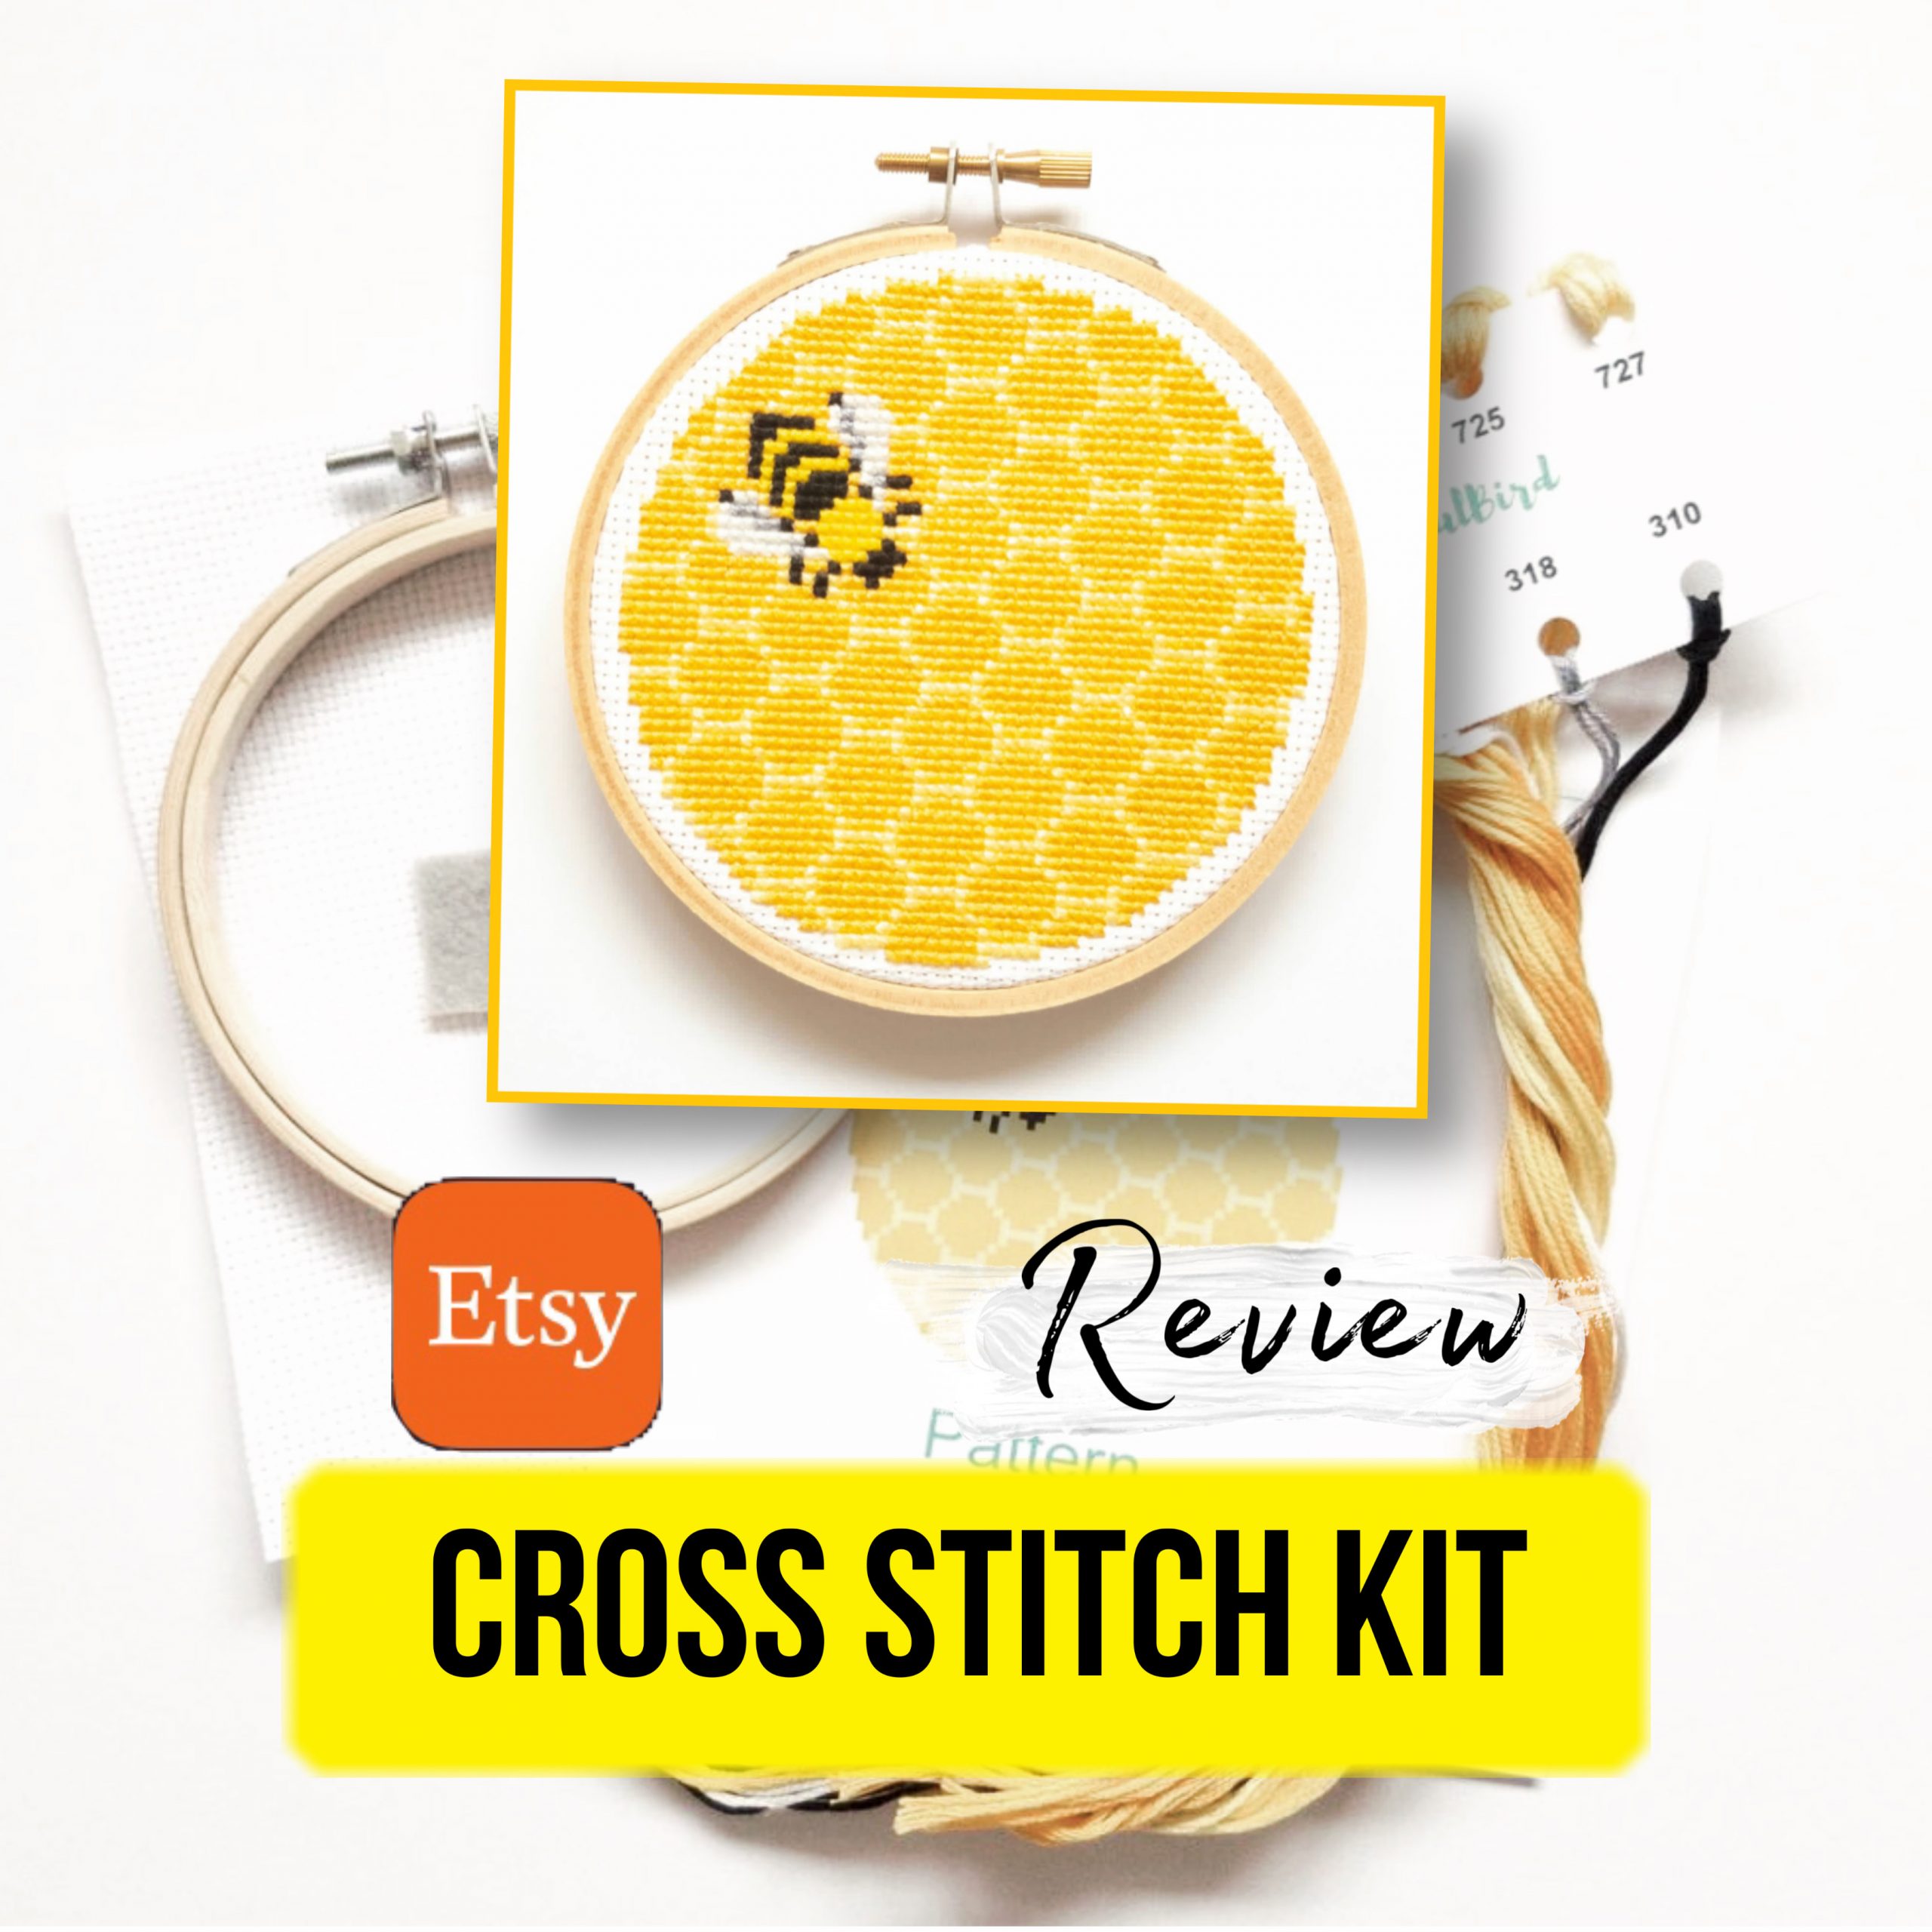 “Honey bee” – cross stitch kit on Etsy. Review.